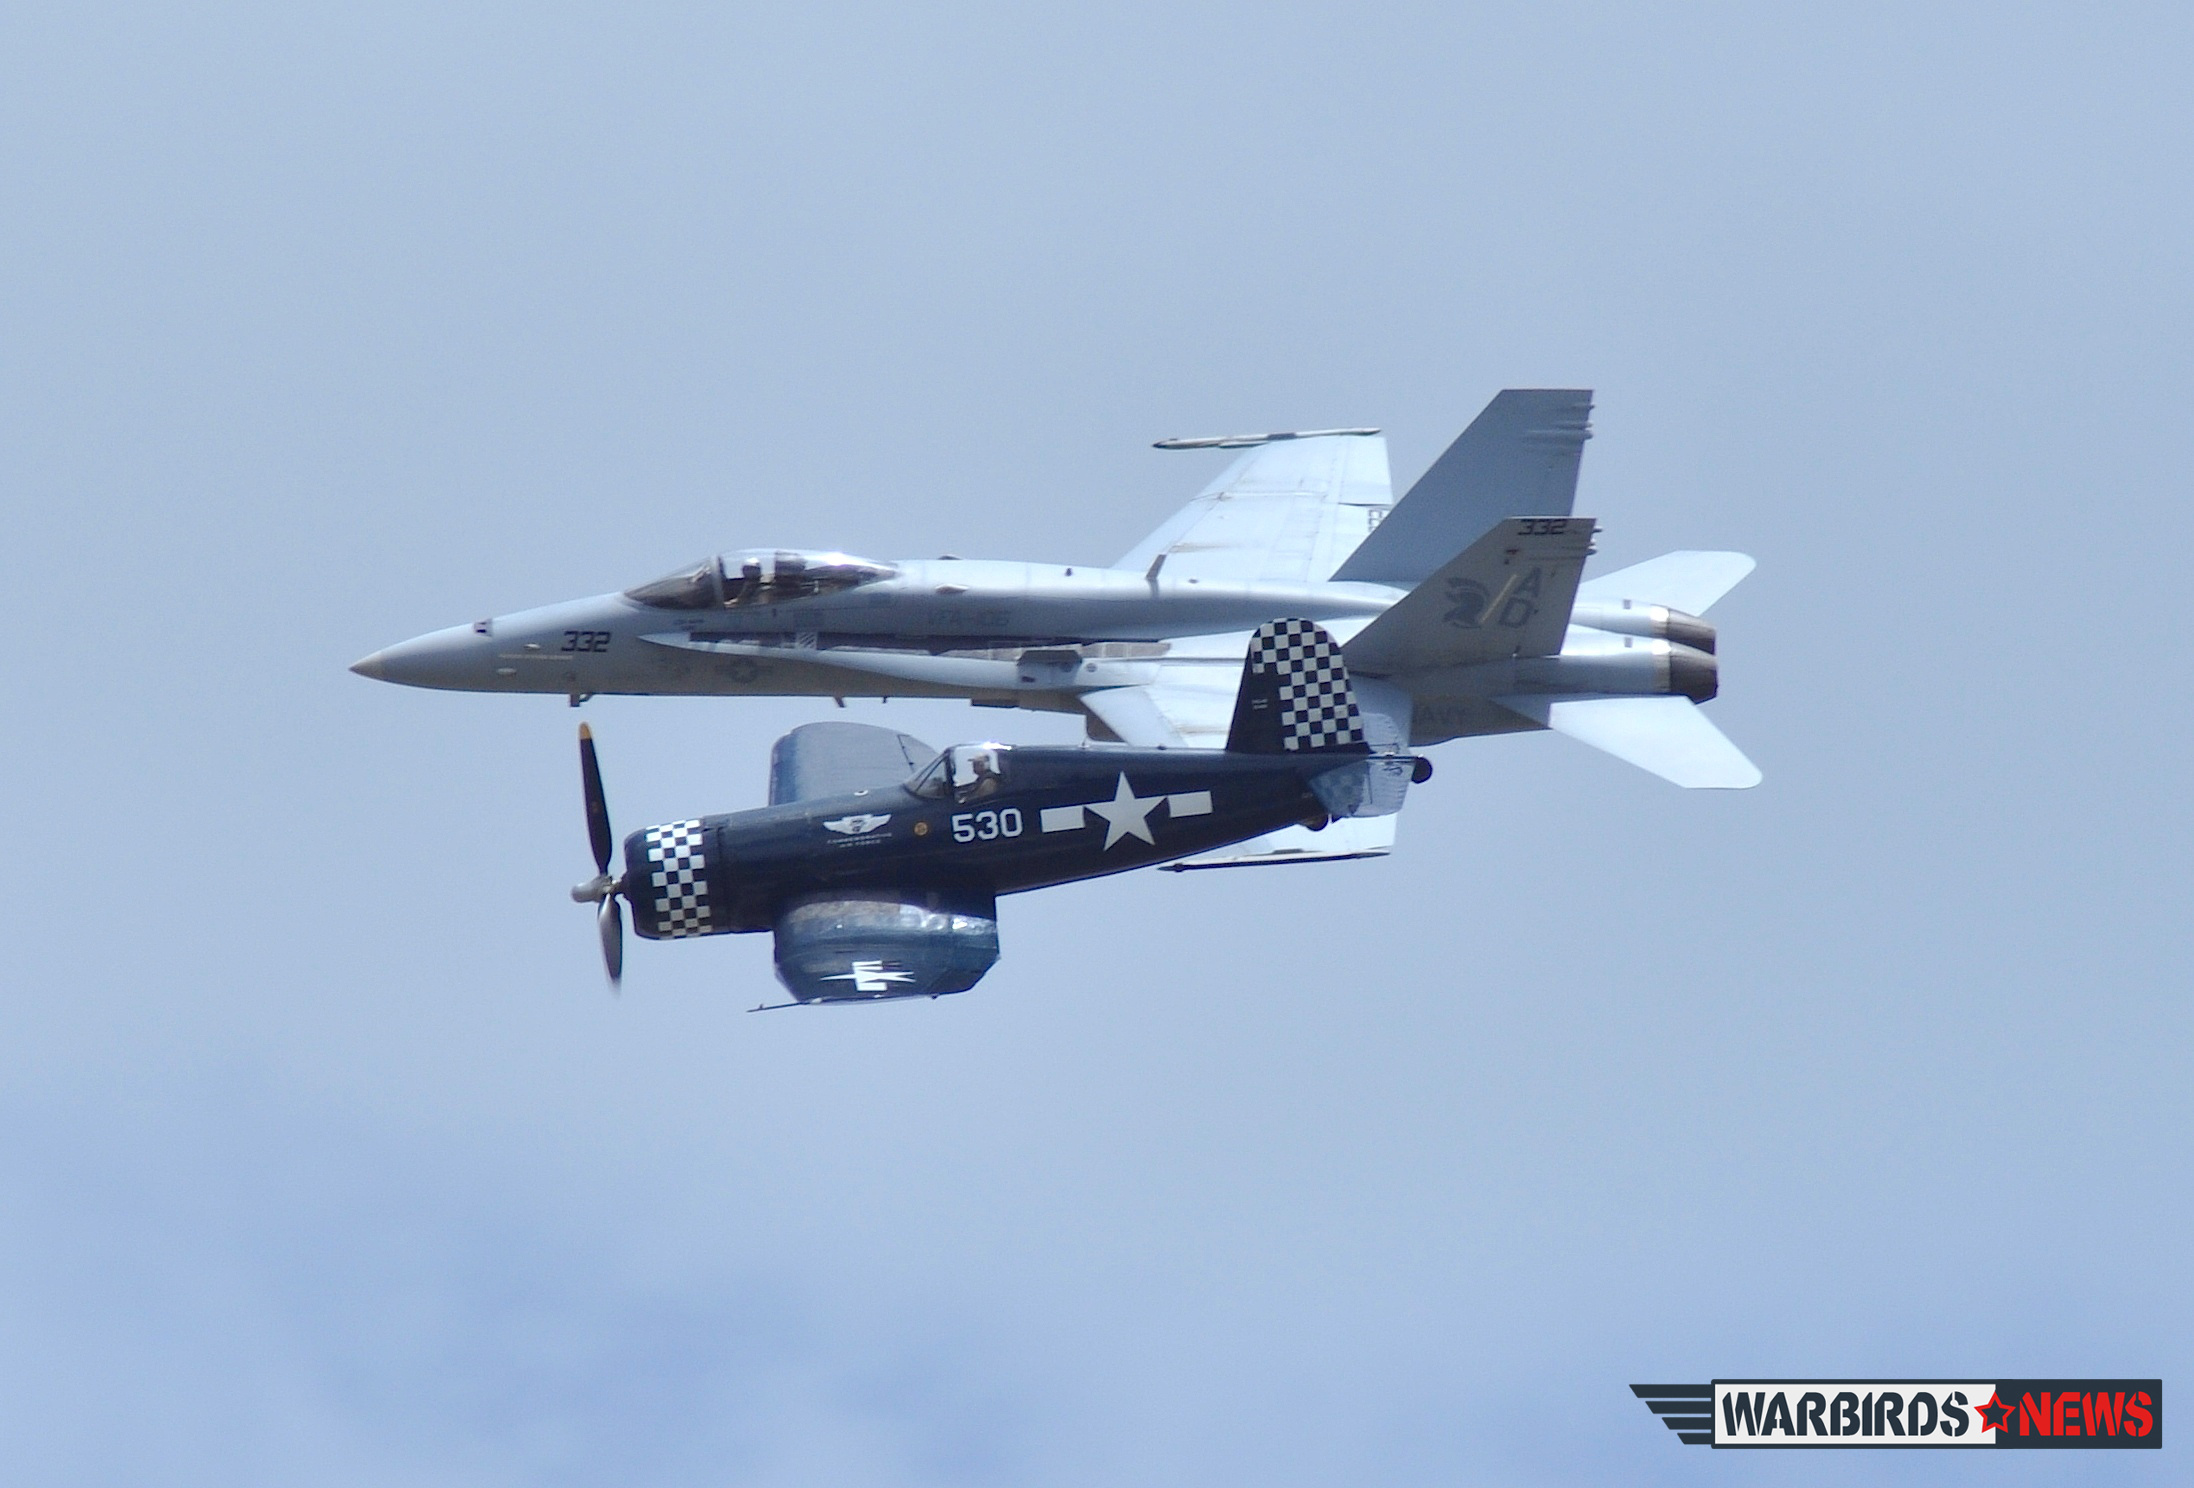 Following a hiatus since the sequester in 2011, the US Navy will begin performing their Heritage Flights at air shows across the USA beginning in 2016. This image shows the CAF Dixi Wing's FG-1D Corsair flying with a Navy F/A-18 Hornet at the NAS Atlanta show circa 2008. (photo by Moreno Aguiari)